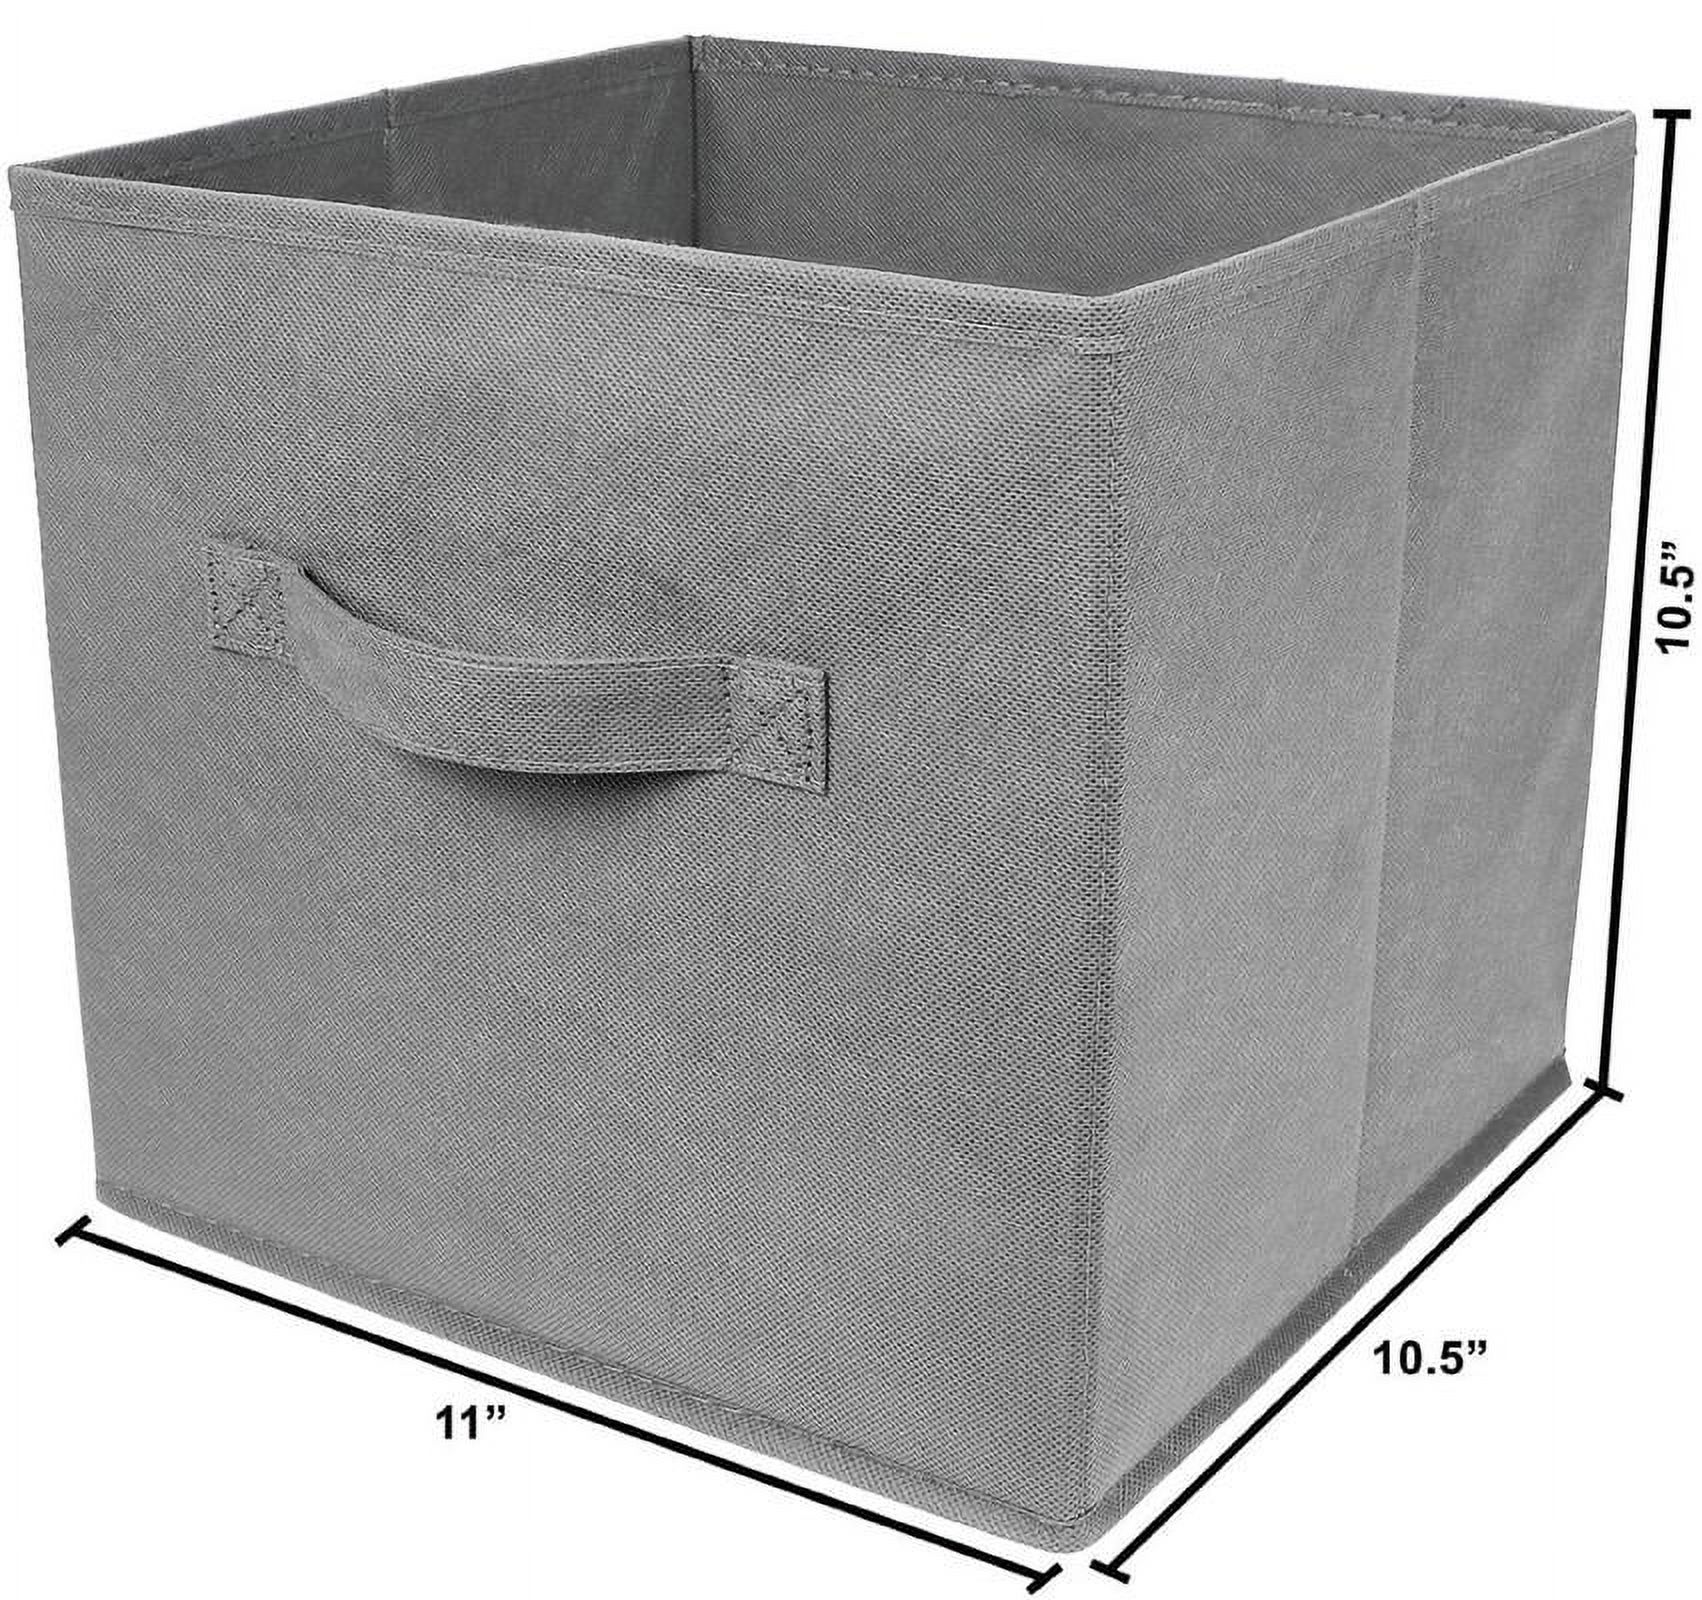 Greenco Foldable Fabric Storage Cubes Non-Woven Fabric | Gray Cube Storage Bins | Shelf Baskets| Gray Fabric Cubes | 6 Pack - image 5 of 5